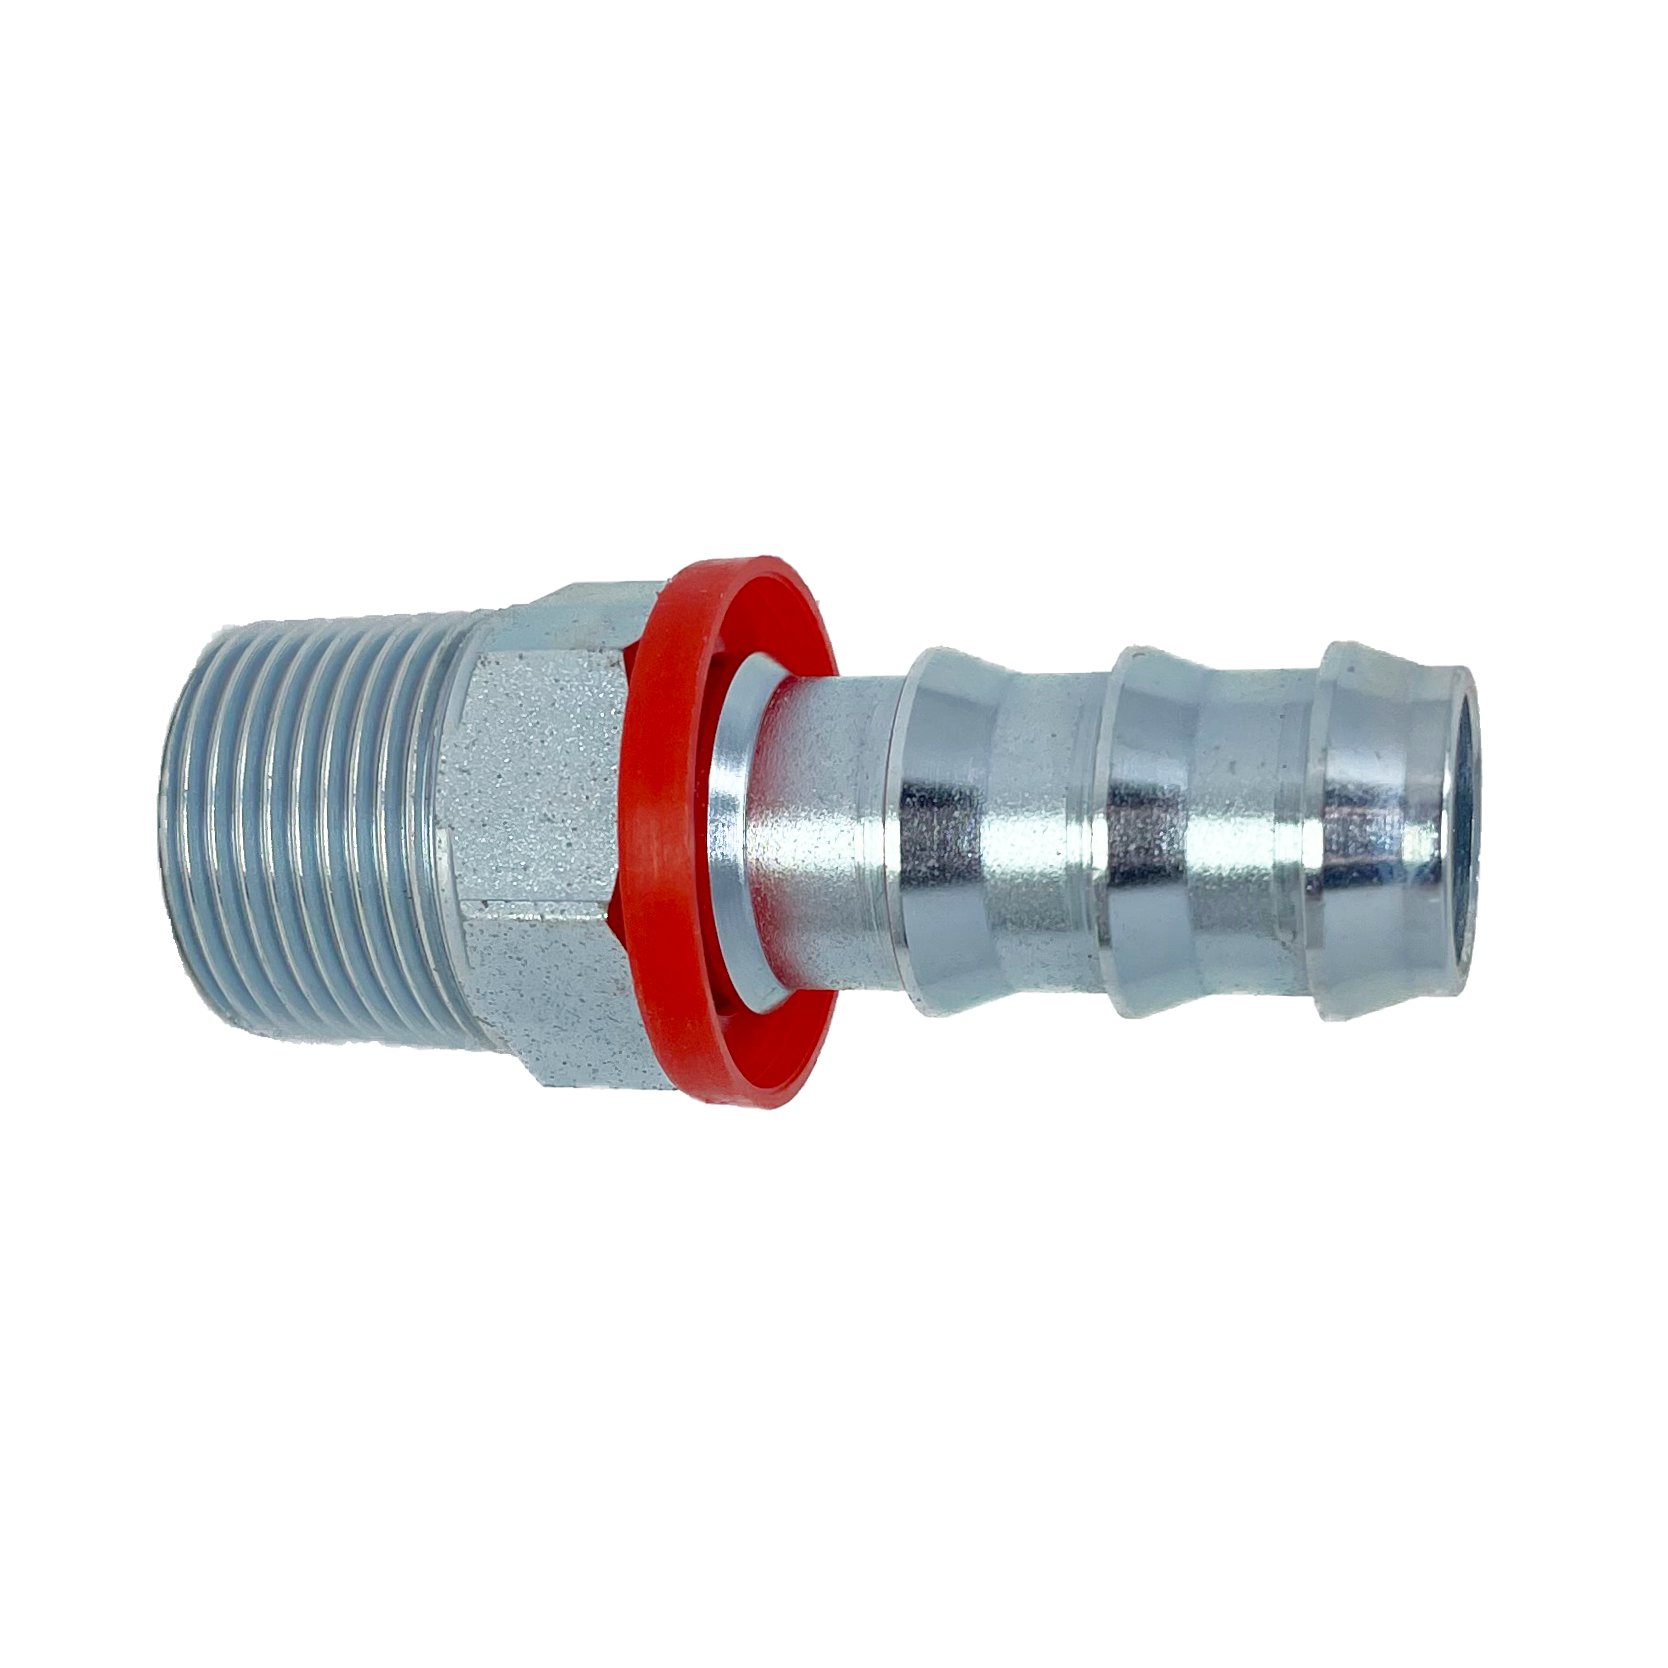 9915-06-08 : Adaptall Straight Adapter, Male 0.375 (3/8") BSPT x 0.5 (1/2") Hose Barb, Carbon Steel